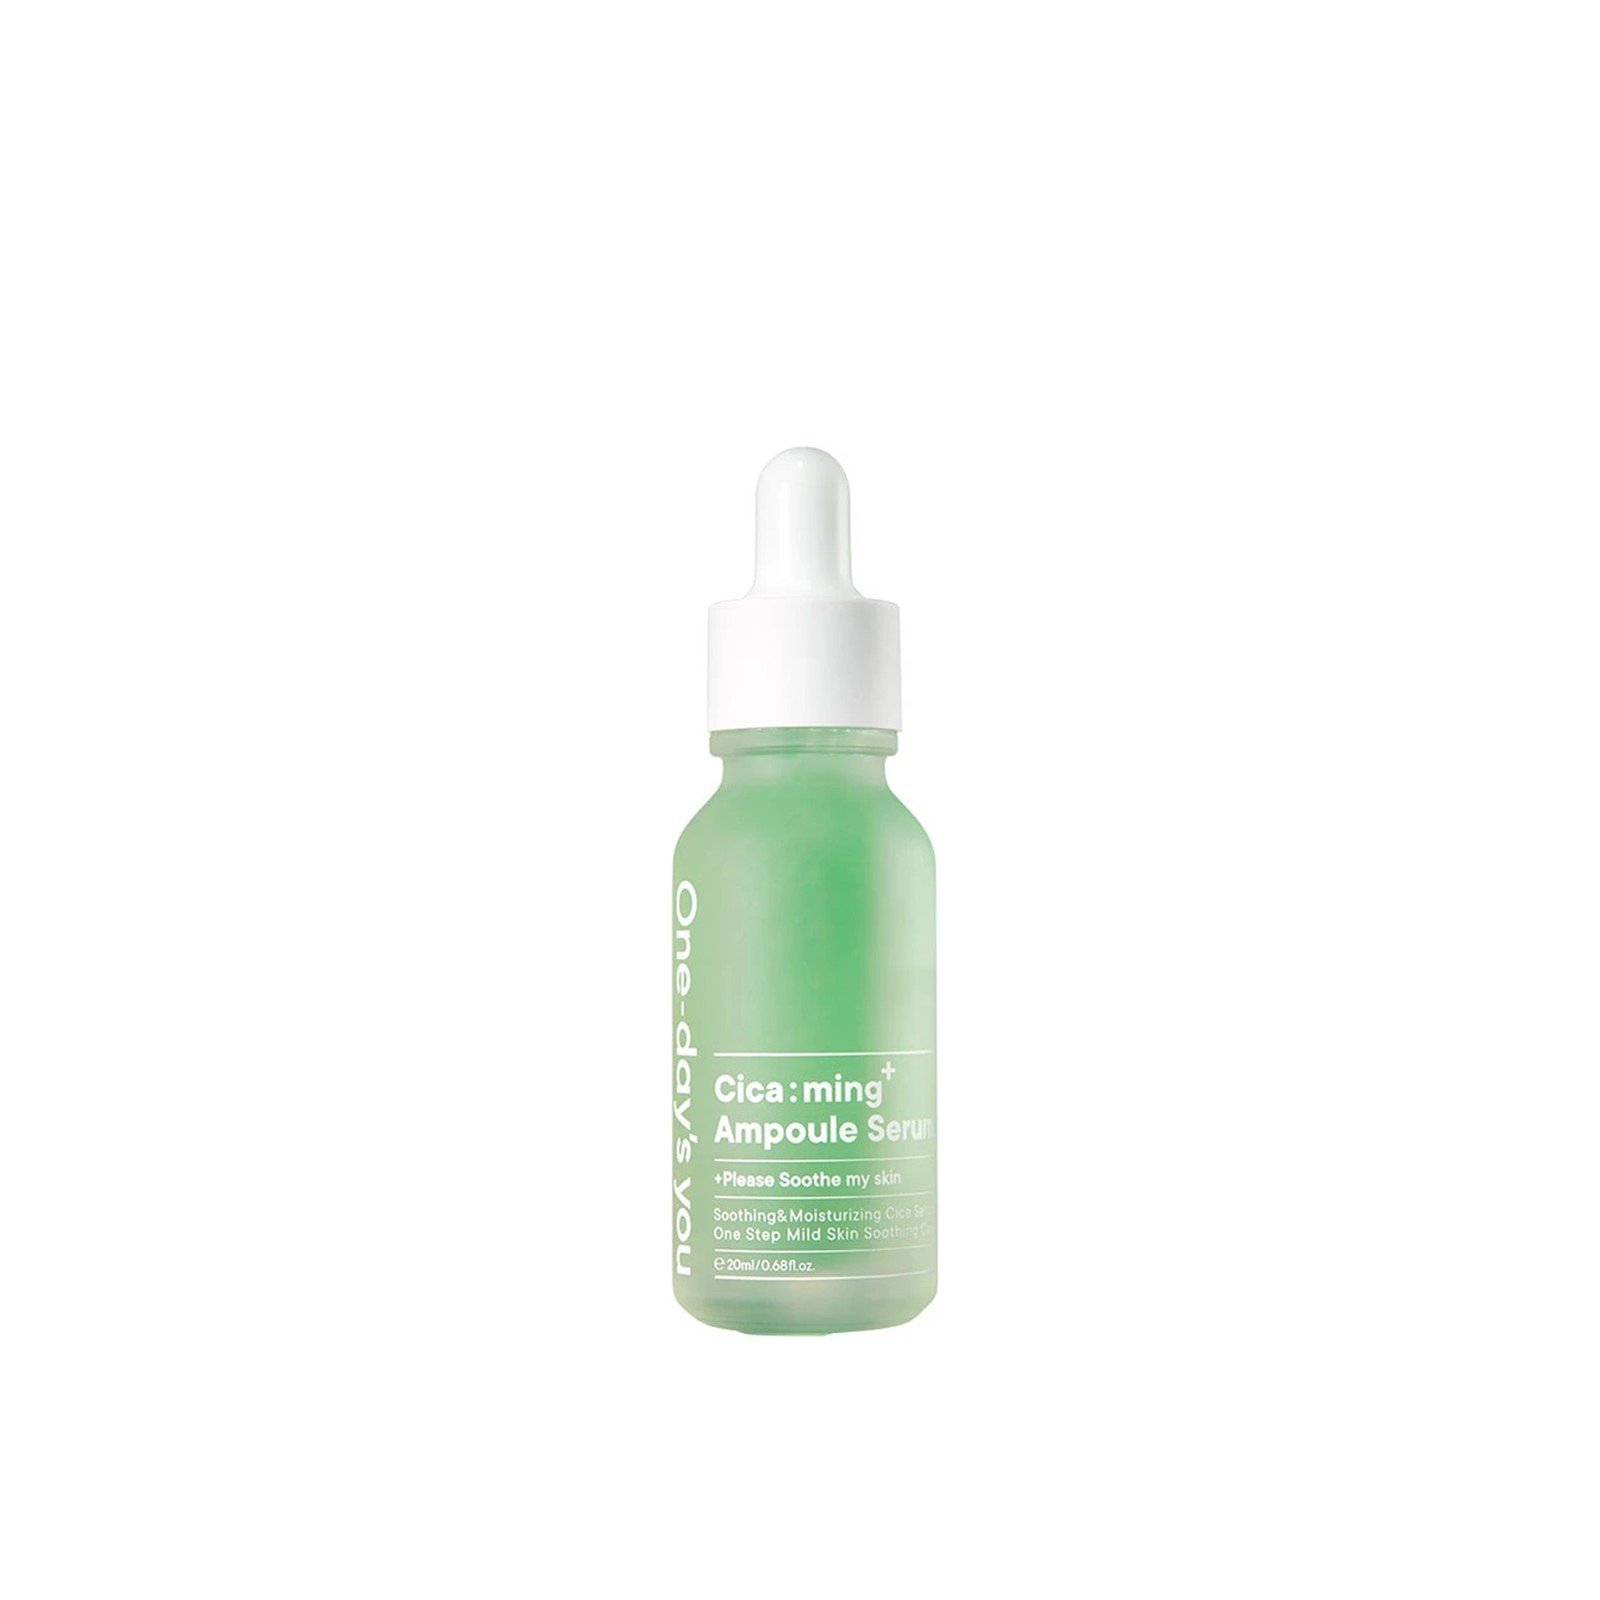 One-day's you Cica:ming Ampoule Serum 30ml